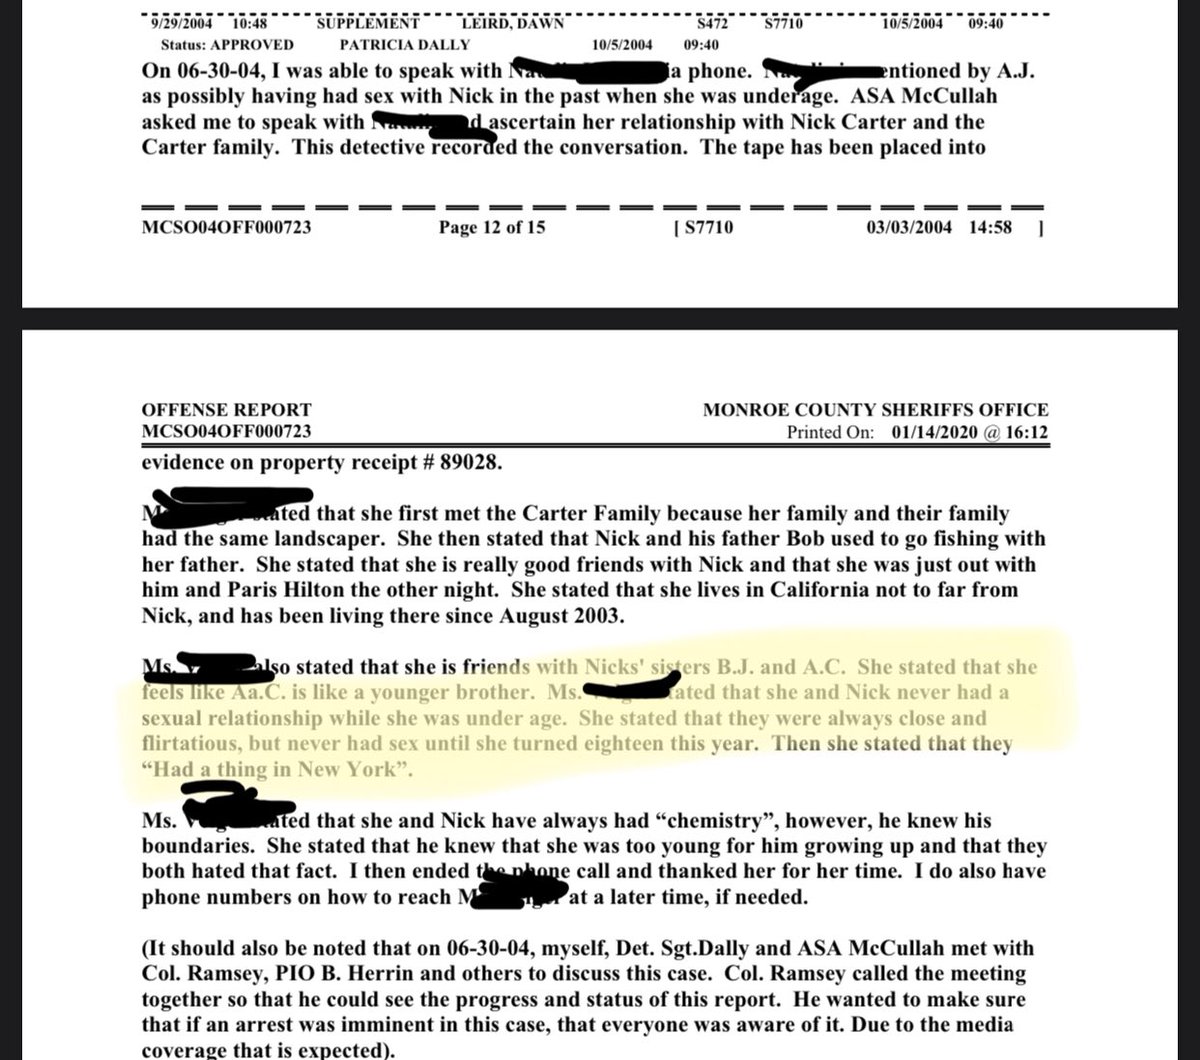 The next tweets in the thread will be the parts of the police report that we highlighted above.